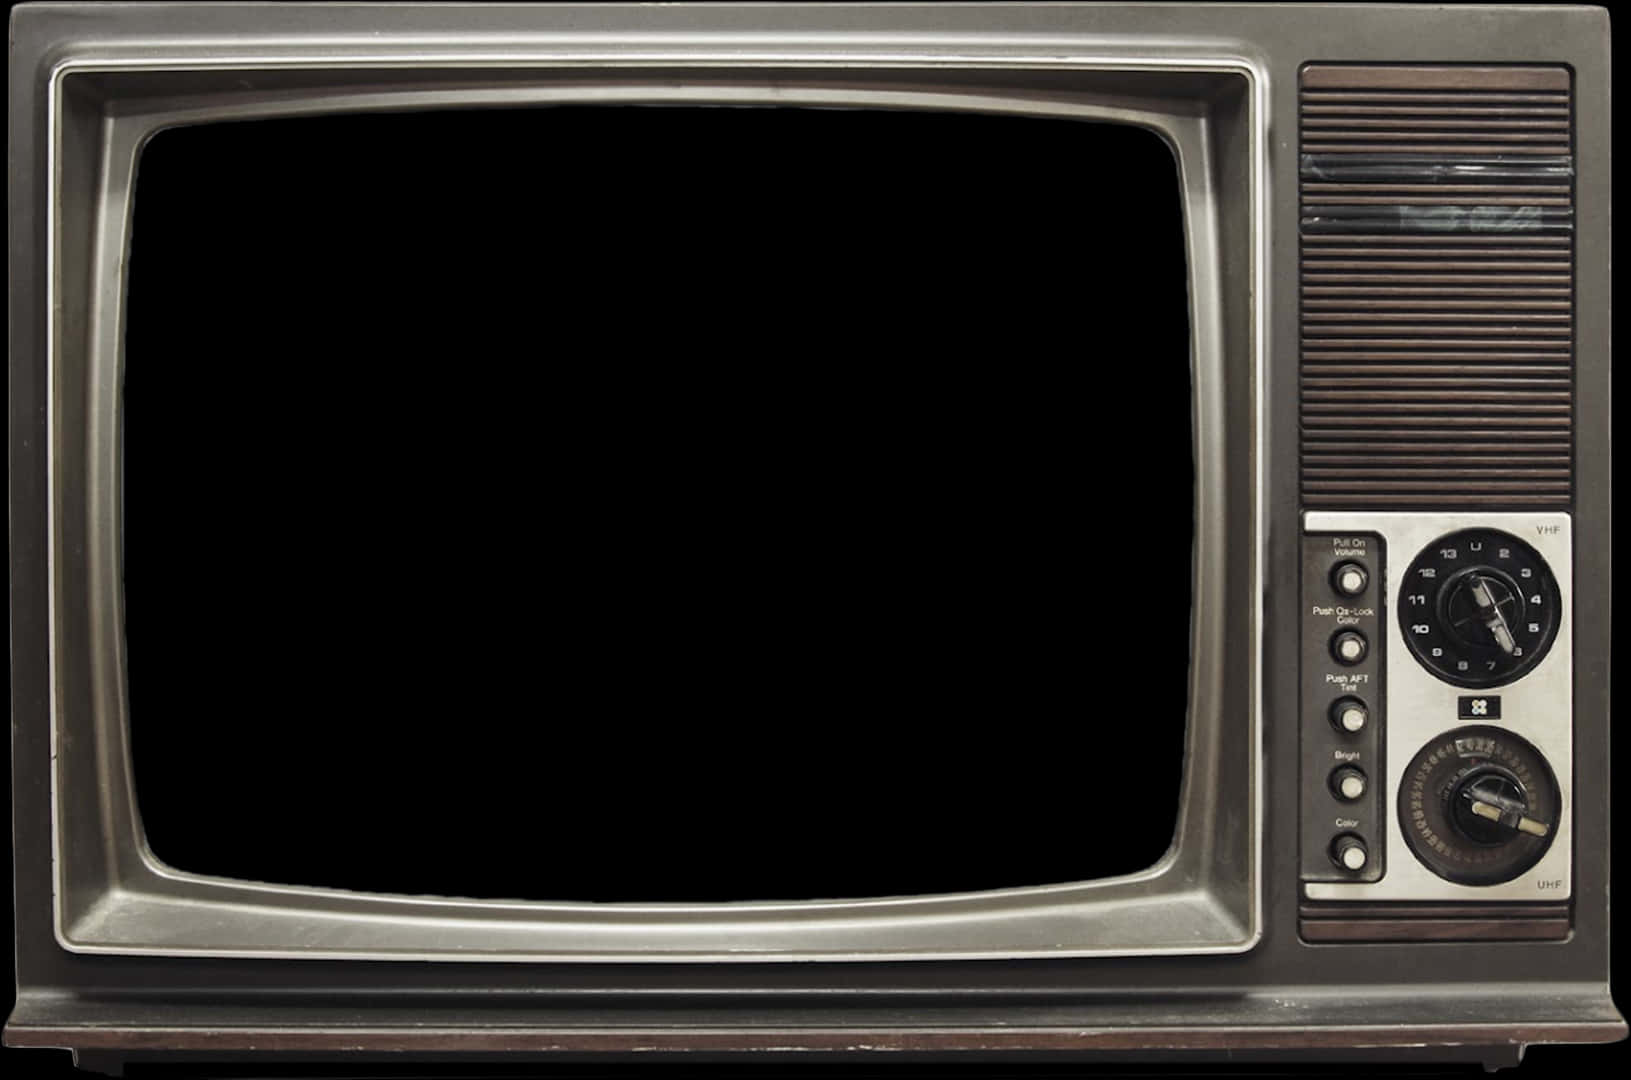 An Old Television With A Black Screen